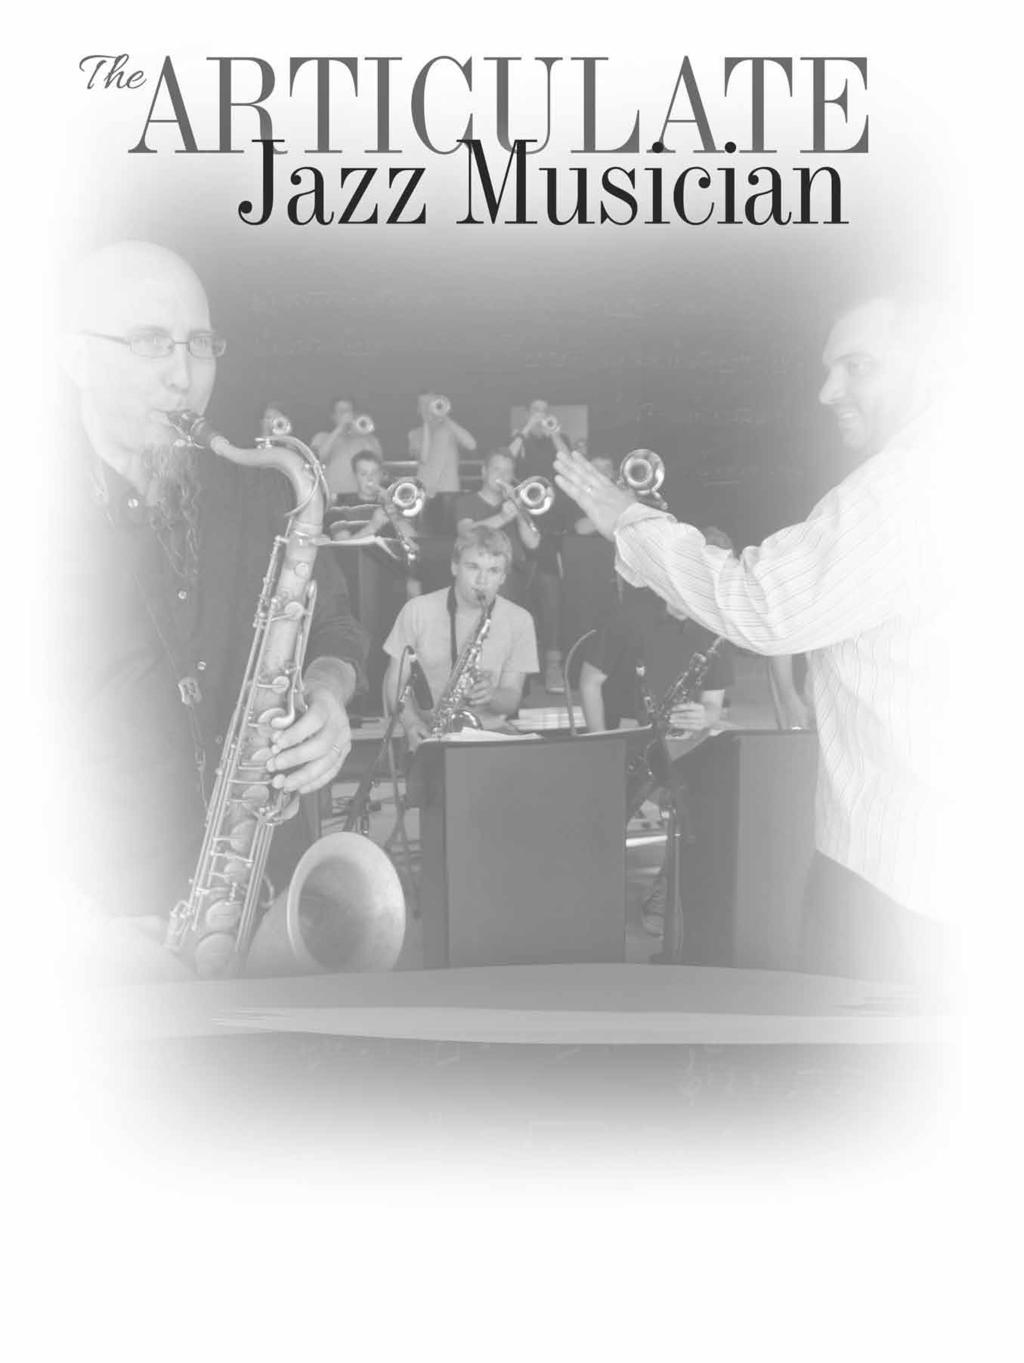 B b instruments Mastering the Language of Jazz Caleb Chapman Jeff Coffin 2013 Alfred Music Publishing Co., Inc. All Rights Reserved including Public Performance.